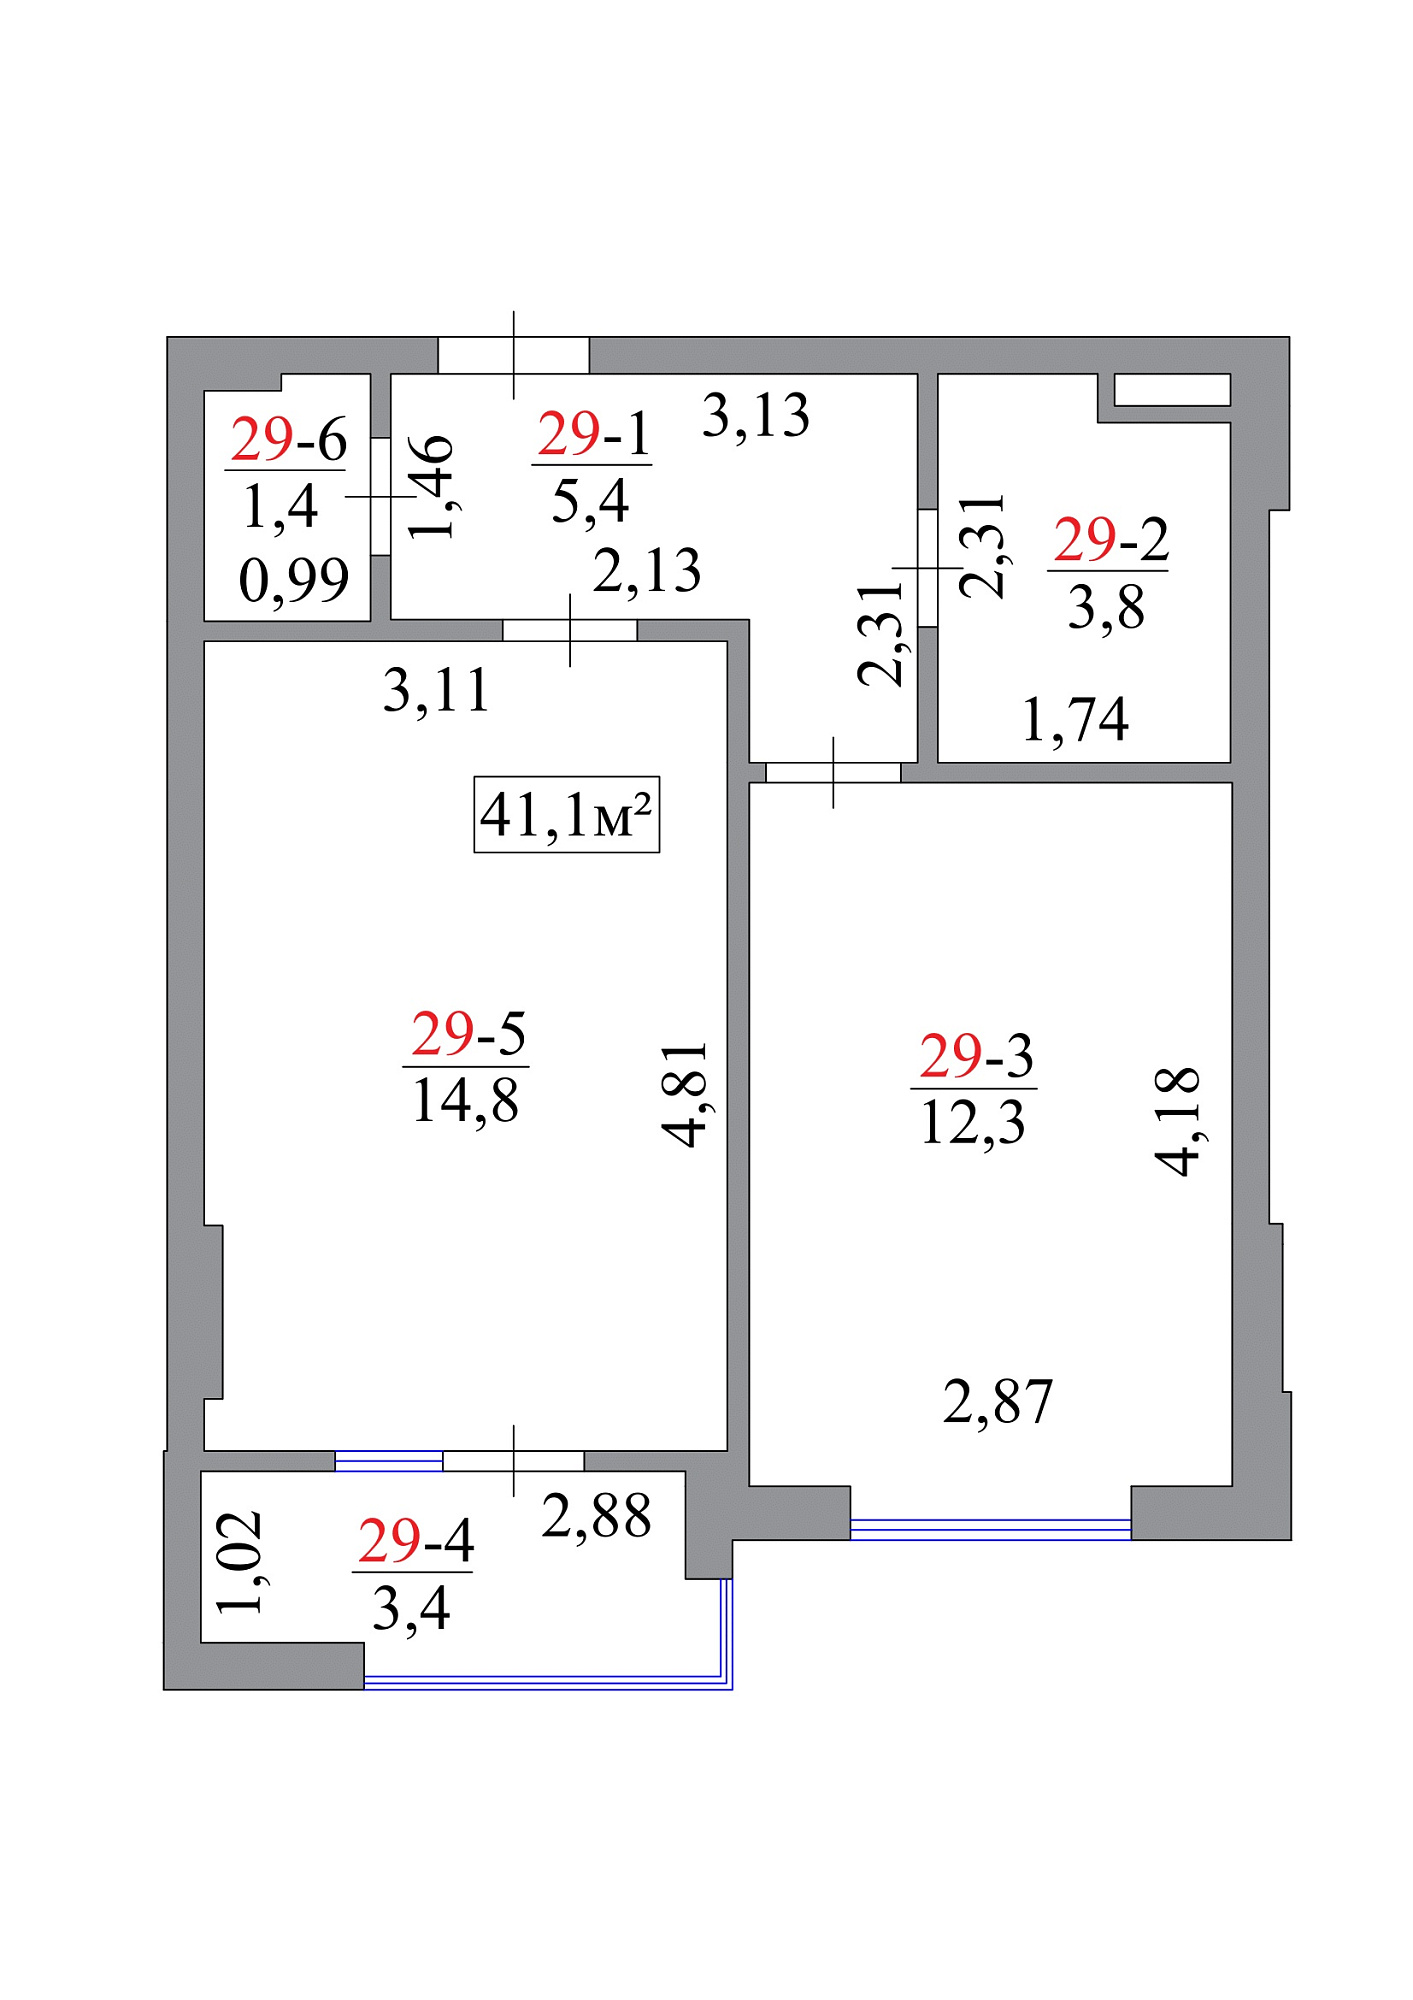 Planning 1-rm flats area 41.1m2, AB-07-03/00026.